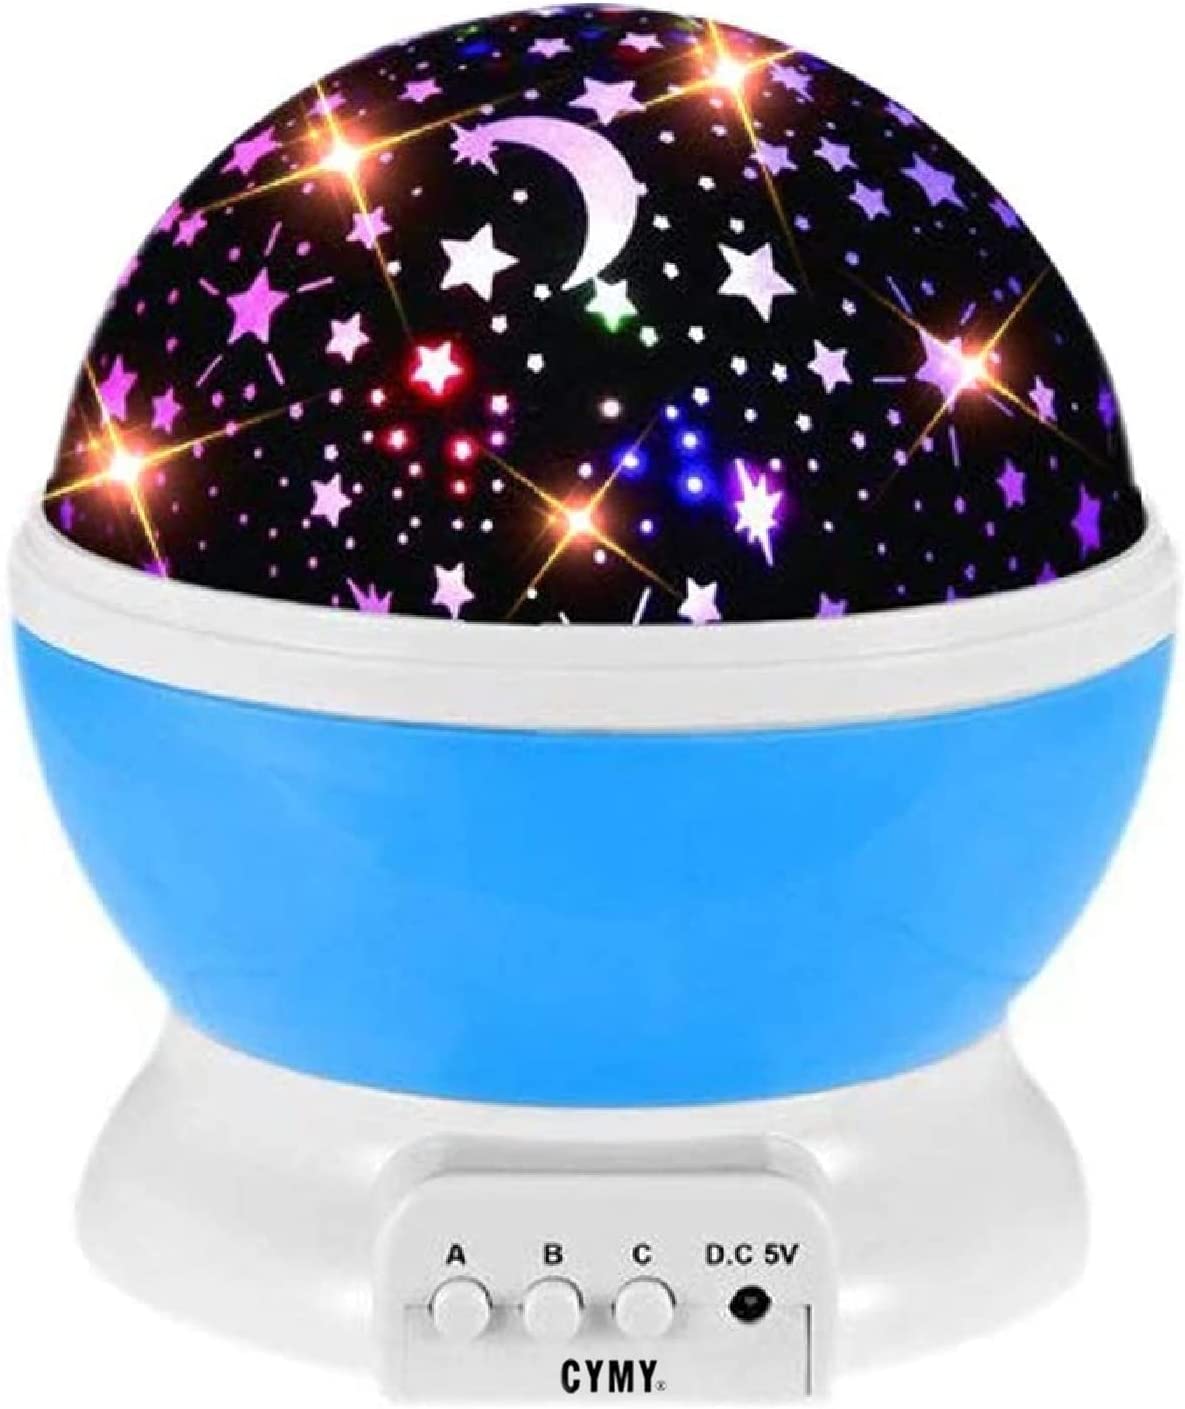 Star Projector,Supertech Multicolor Changes Romantic Rotating Moon Sleep Night Light Lamp with LED Timer Auto-Shut Off in Bedroom Livingroom for Baby Kids Adults Nursery 